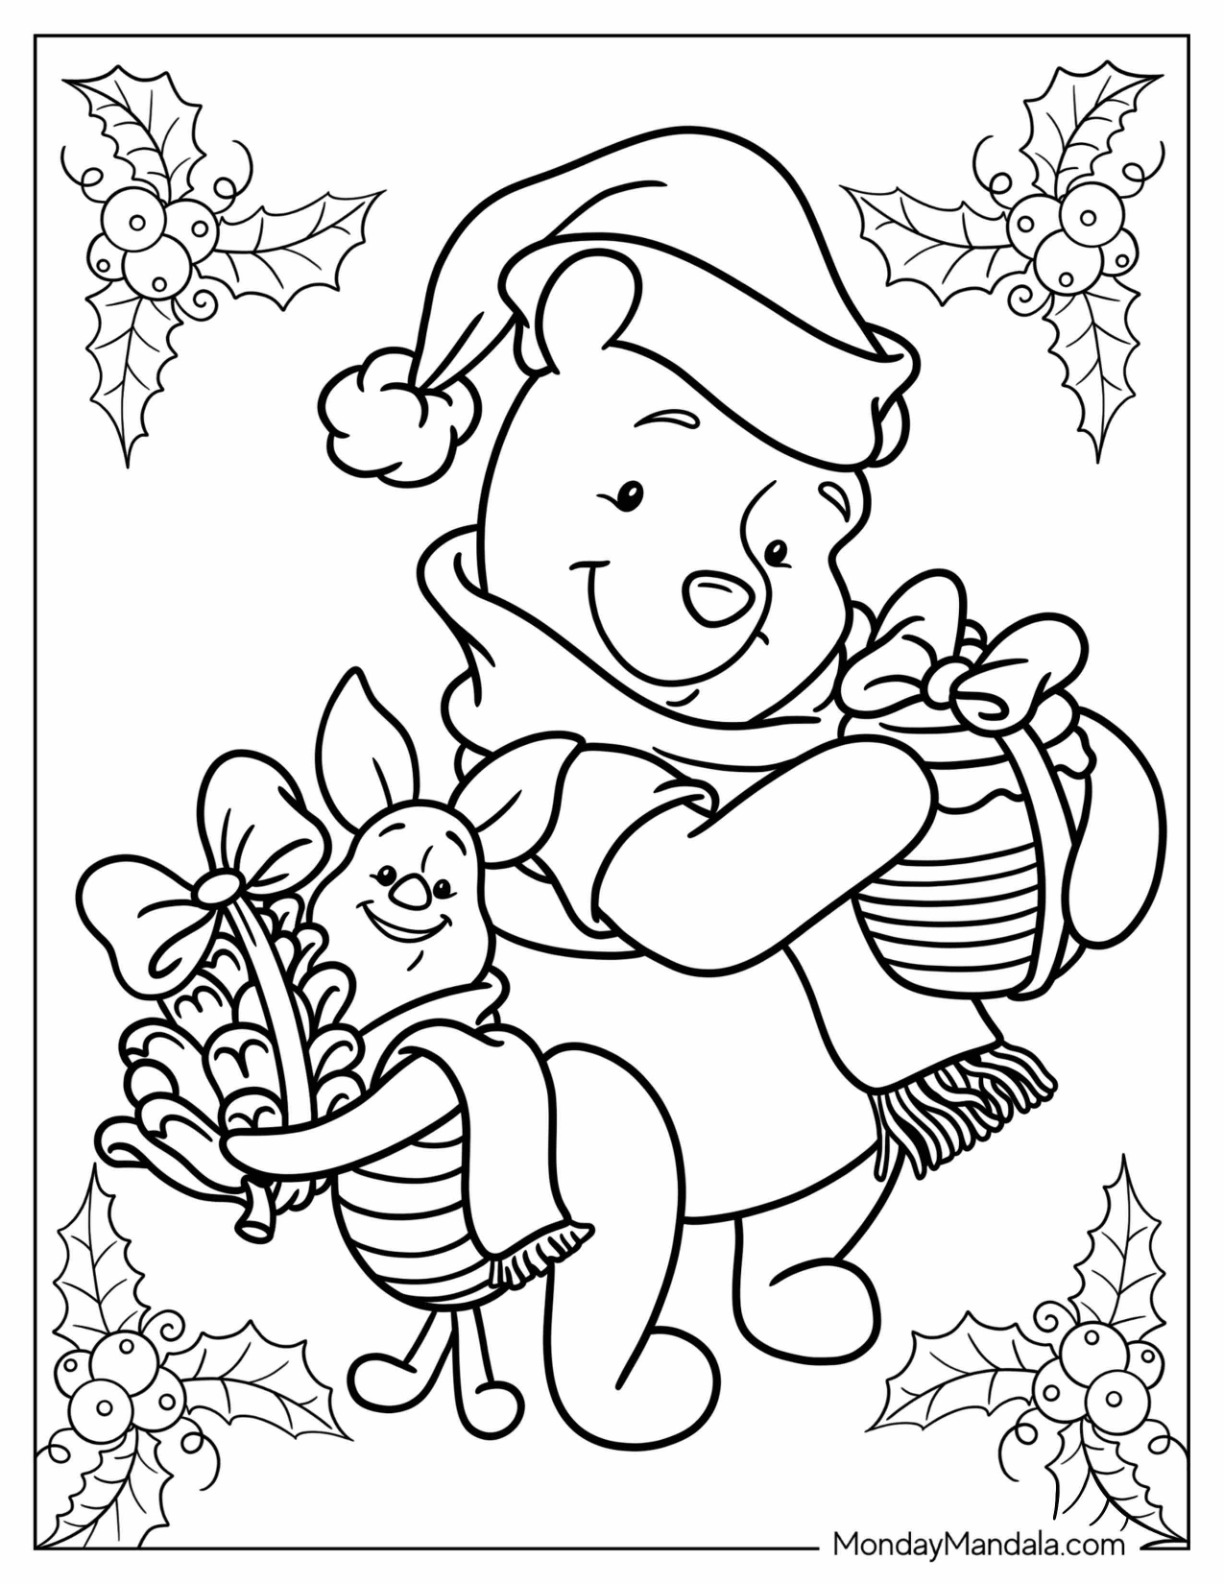 Disney christmas coloring pages free pdf printables